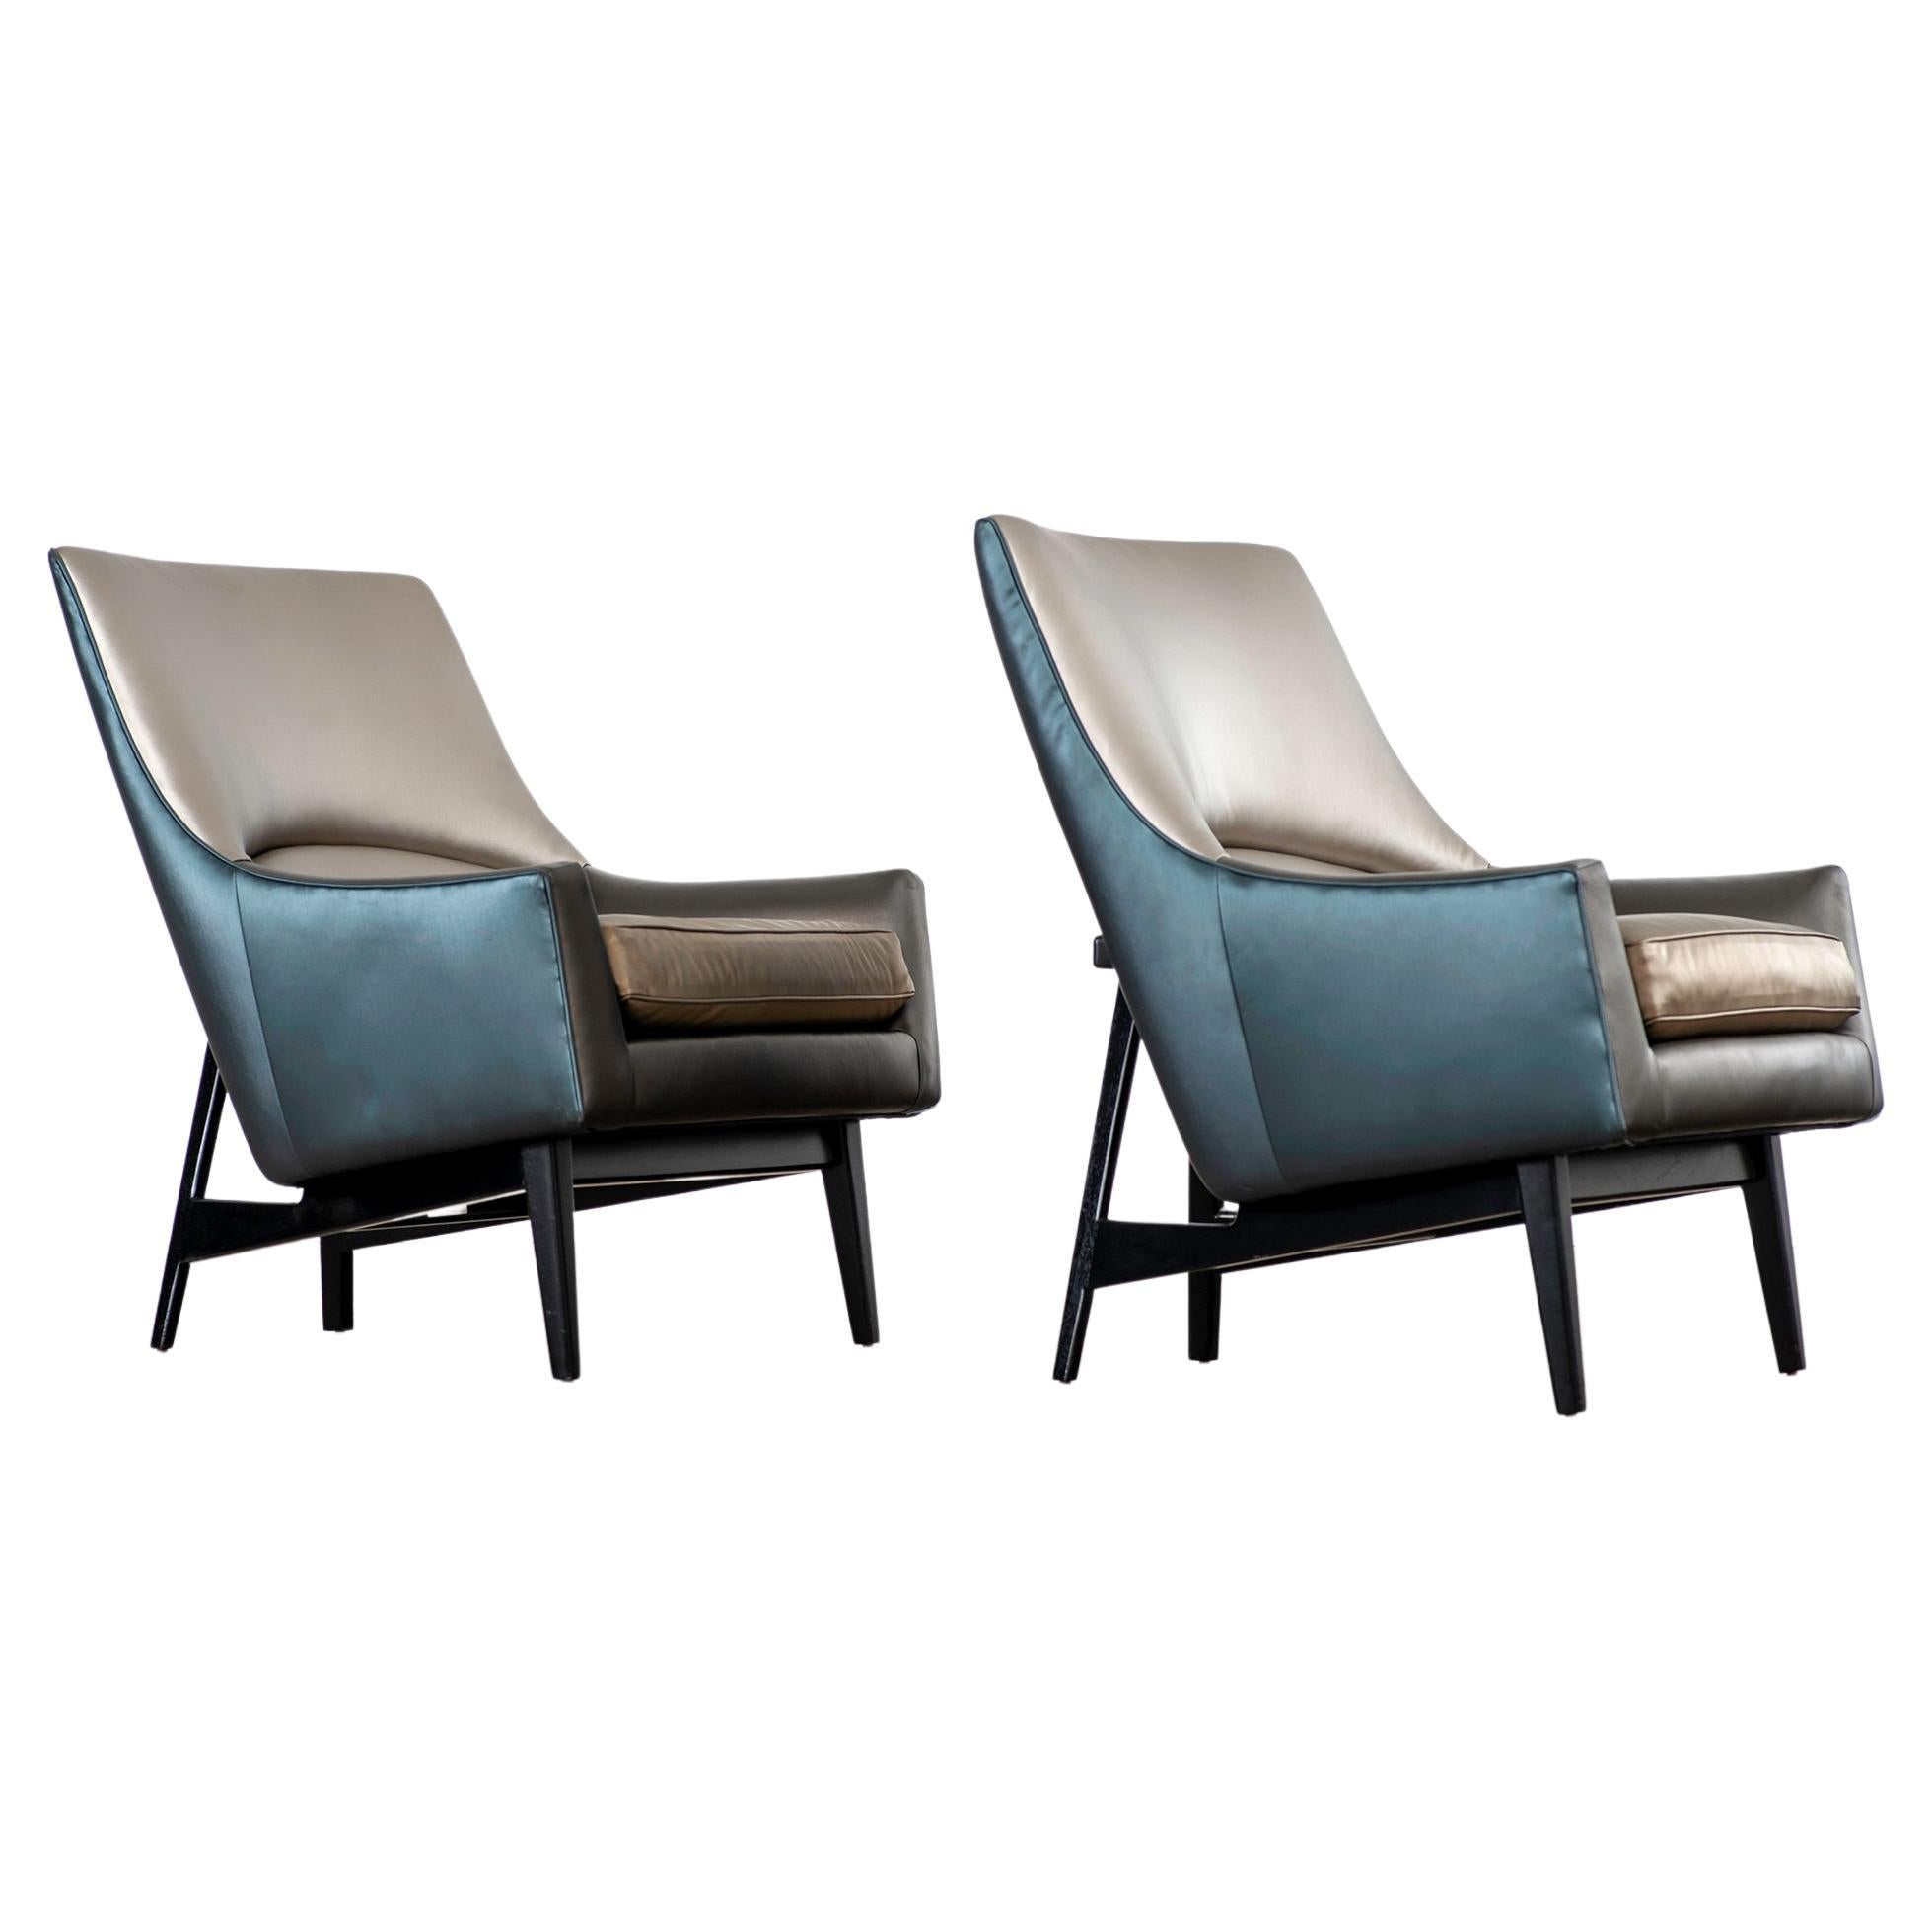 Pair of Jens Risom for Ralph Pucci Metallic Space Age A-Chairs For Sale